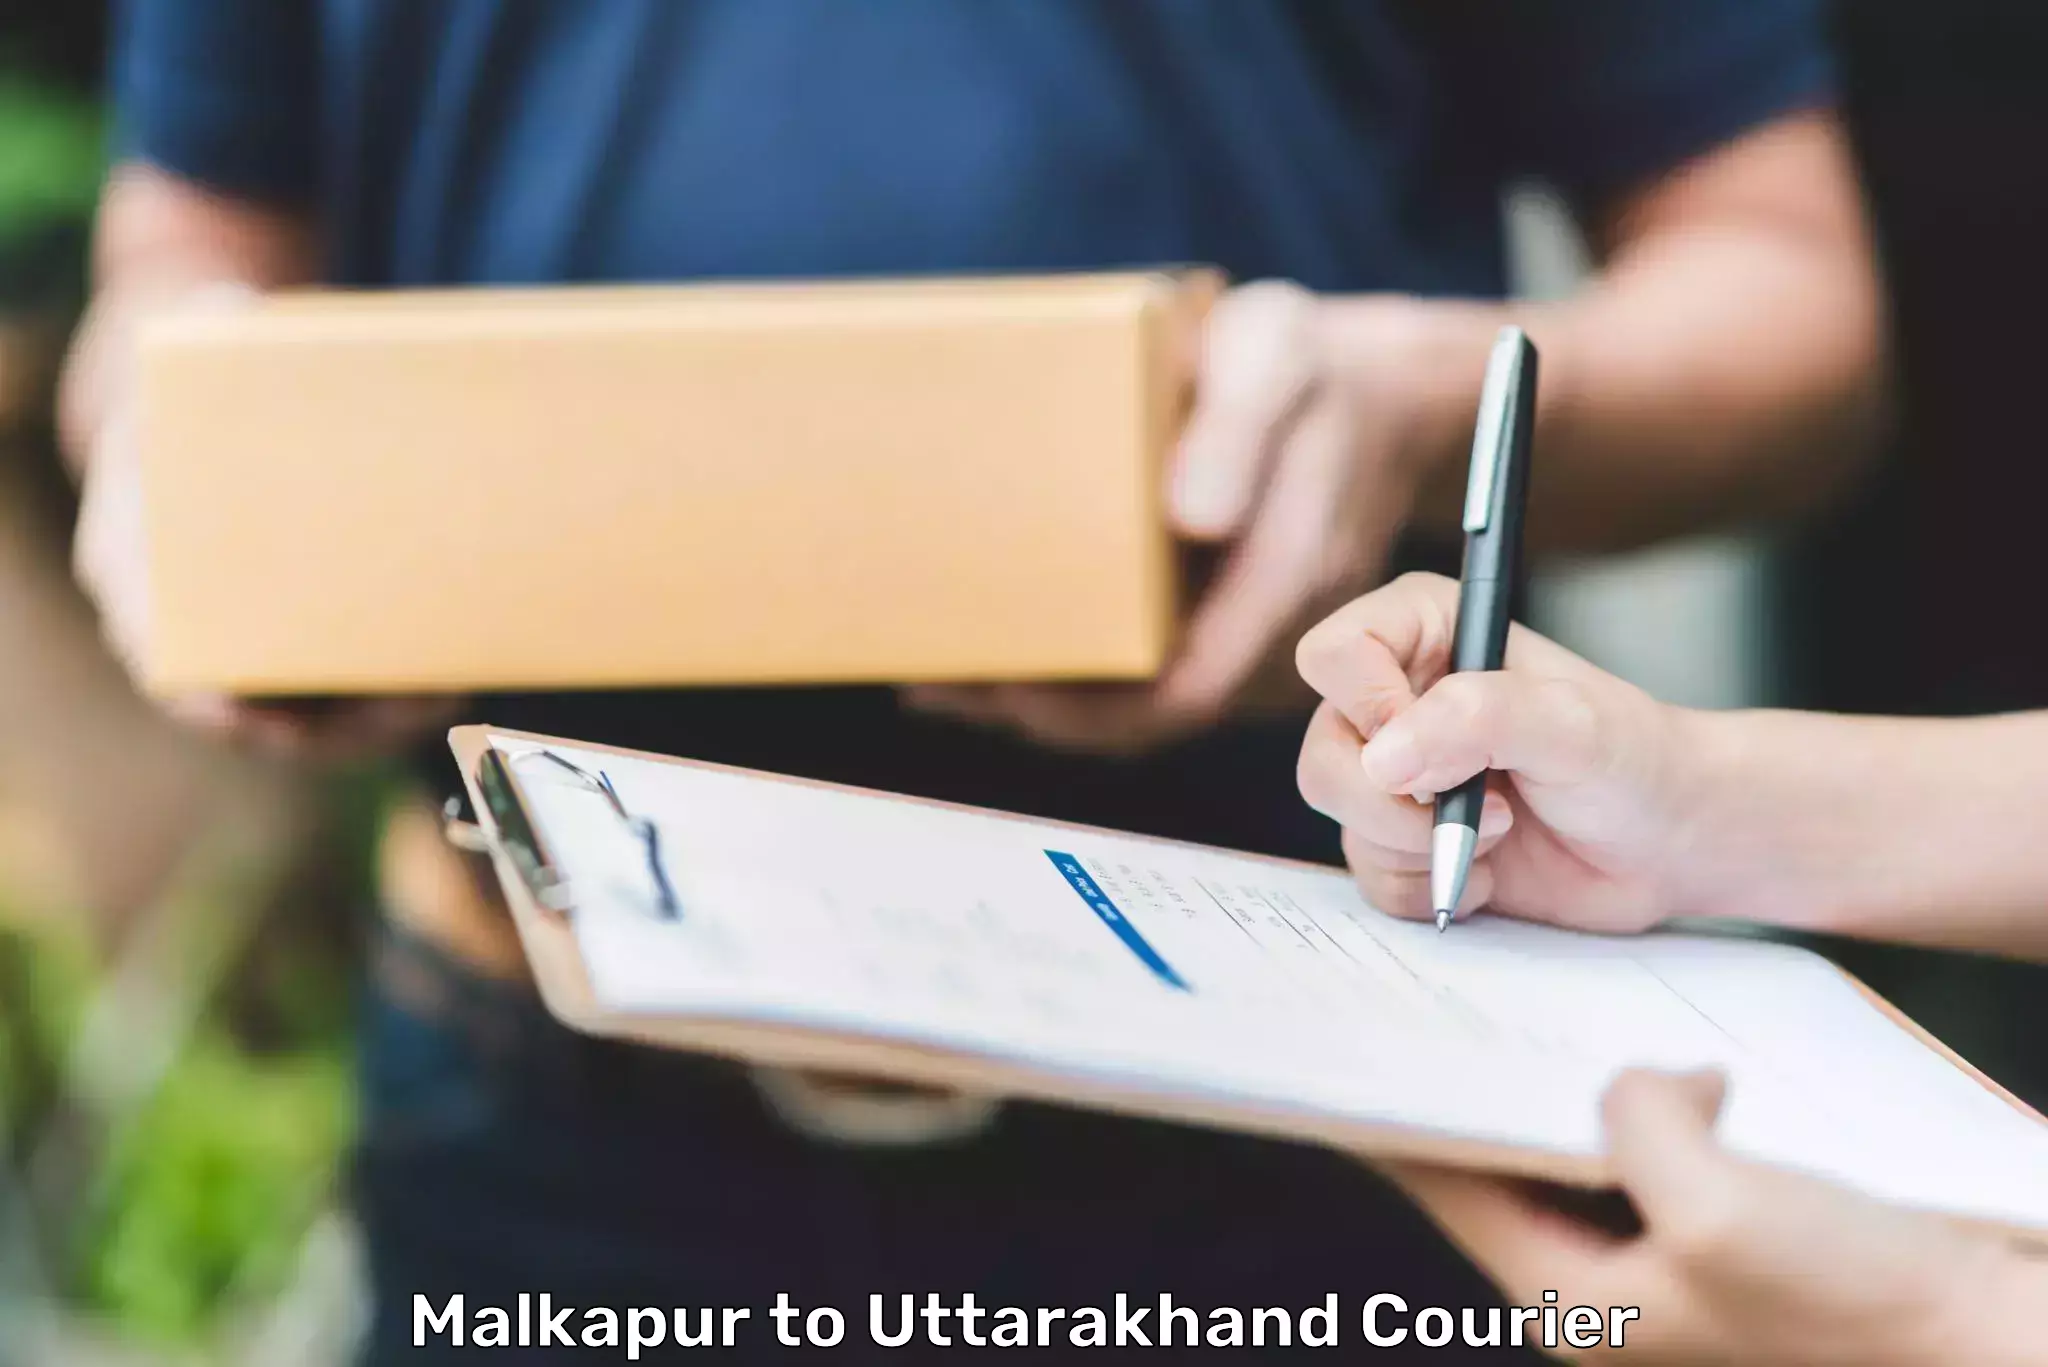 Courier service booking in Malkapur to Paithani